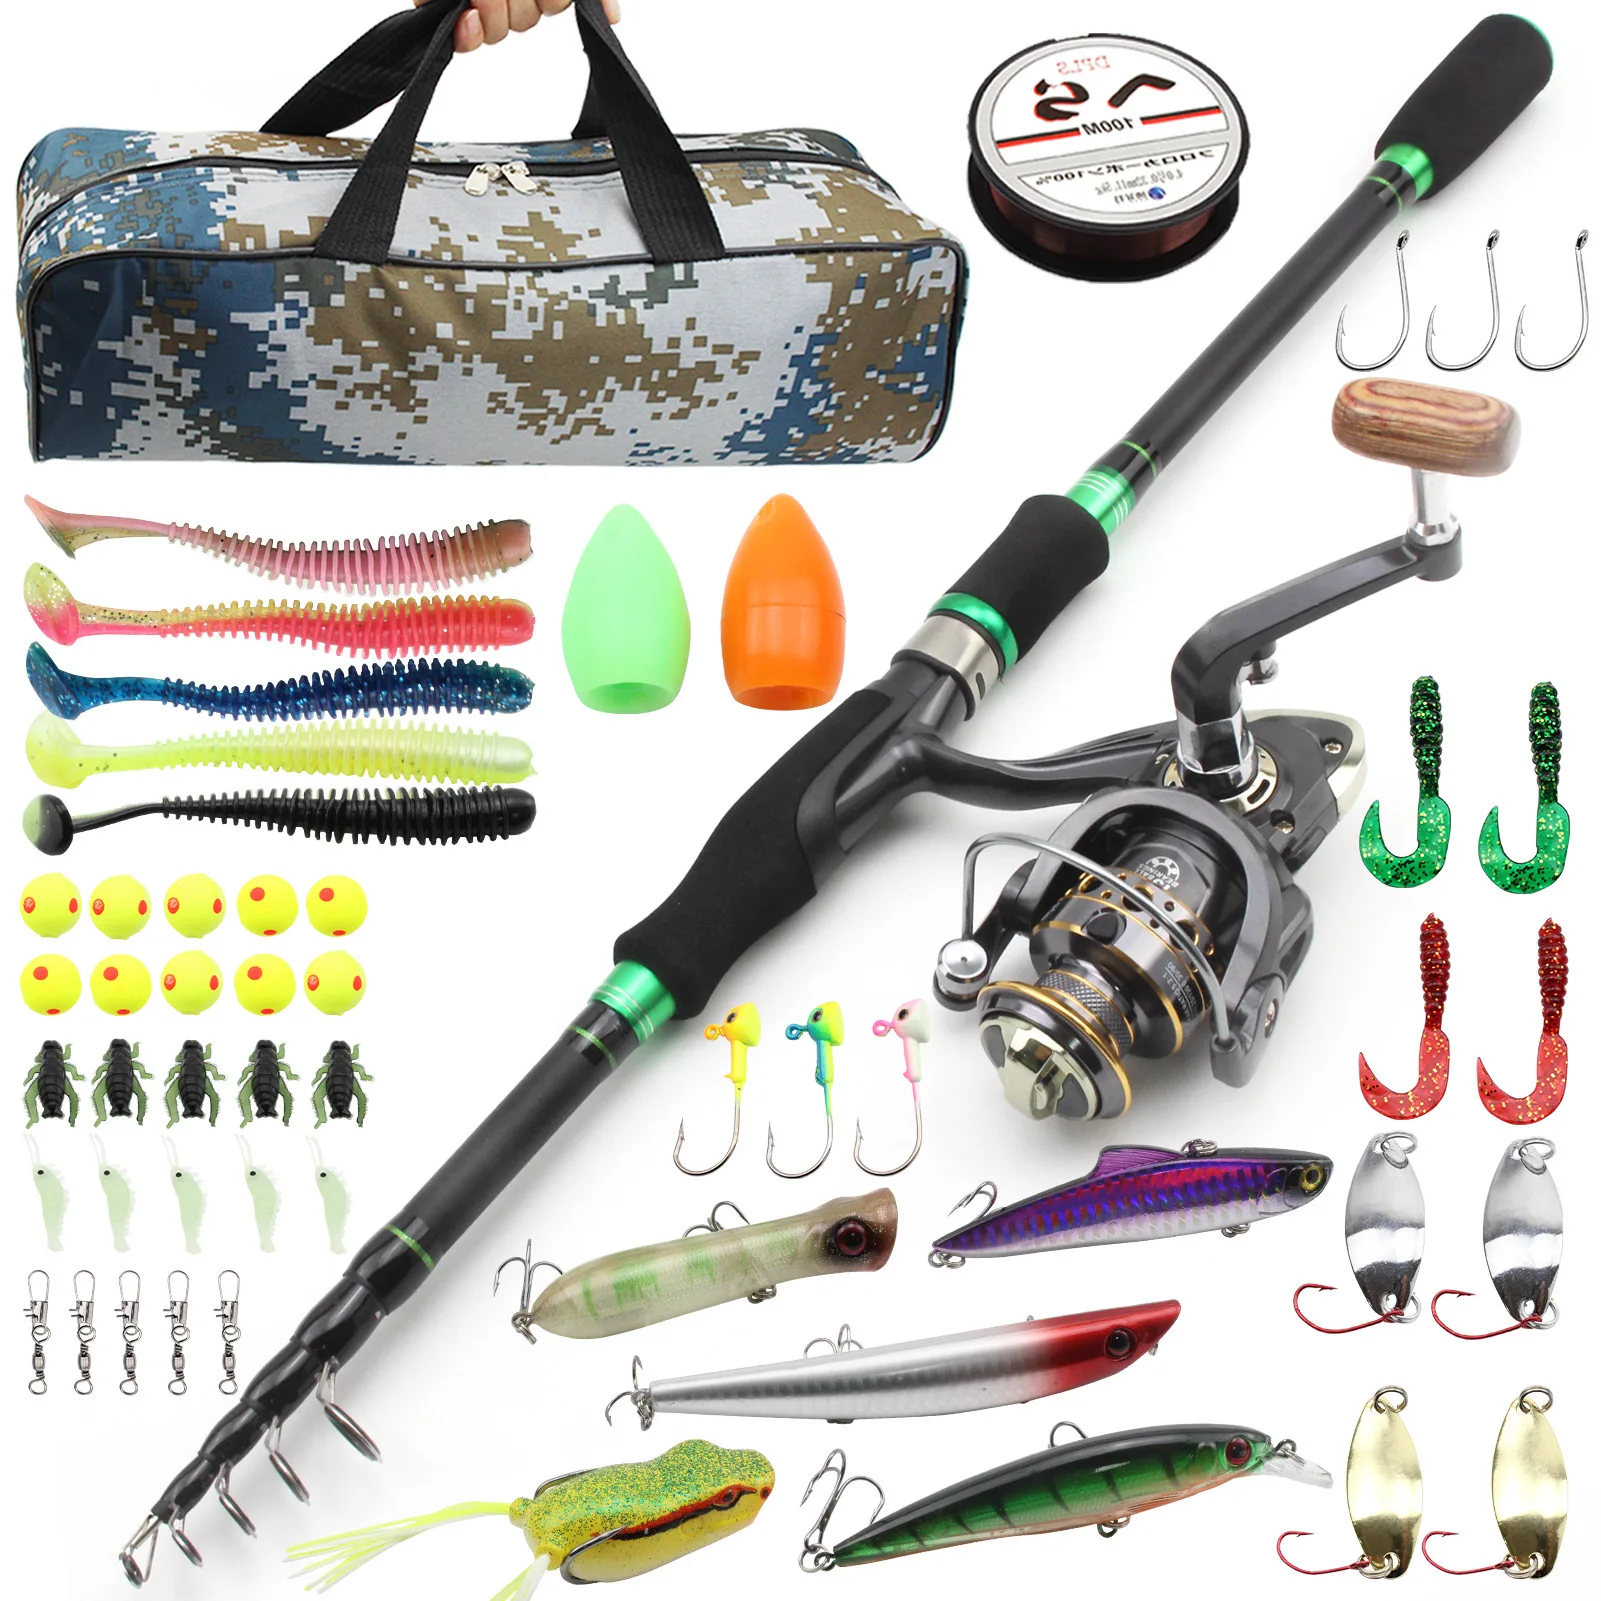 High Quality Fishing Rod and Reel Set 1.8m-2.7m Telescopic Spinning Feeder Ultralight Combo Carbon Fiber Baitcasting Pole Tackle enlarge